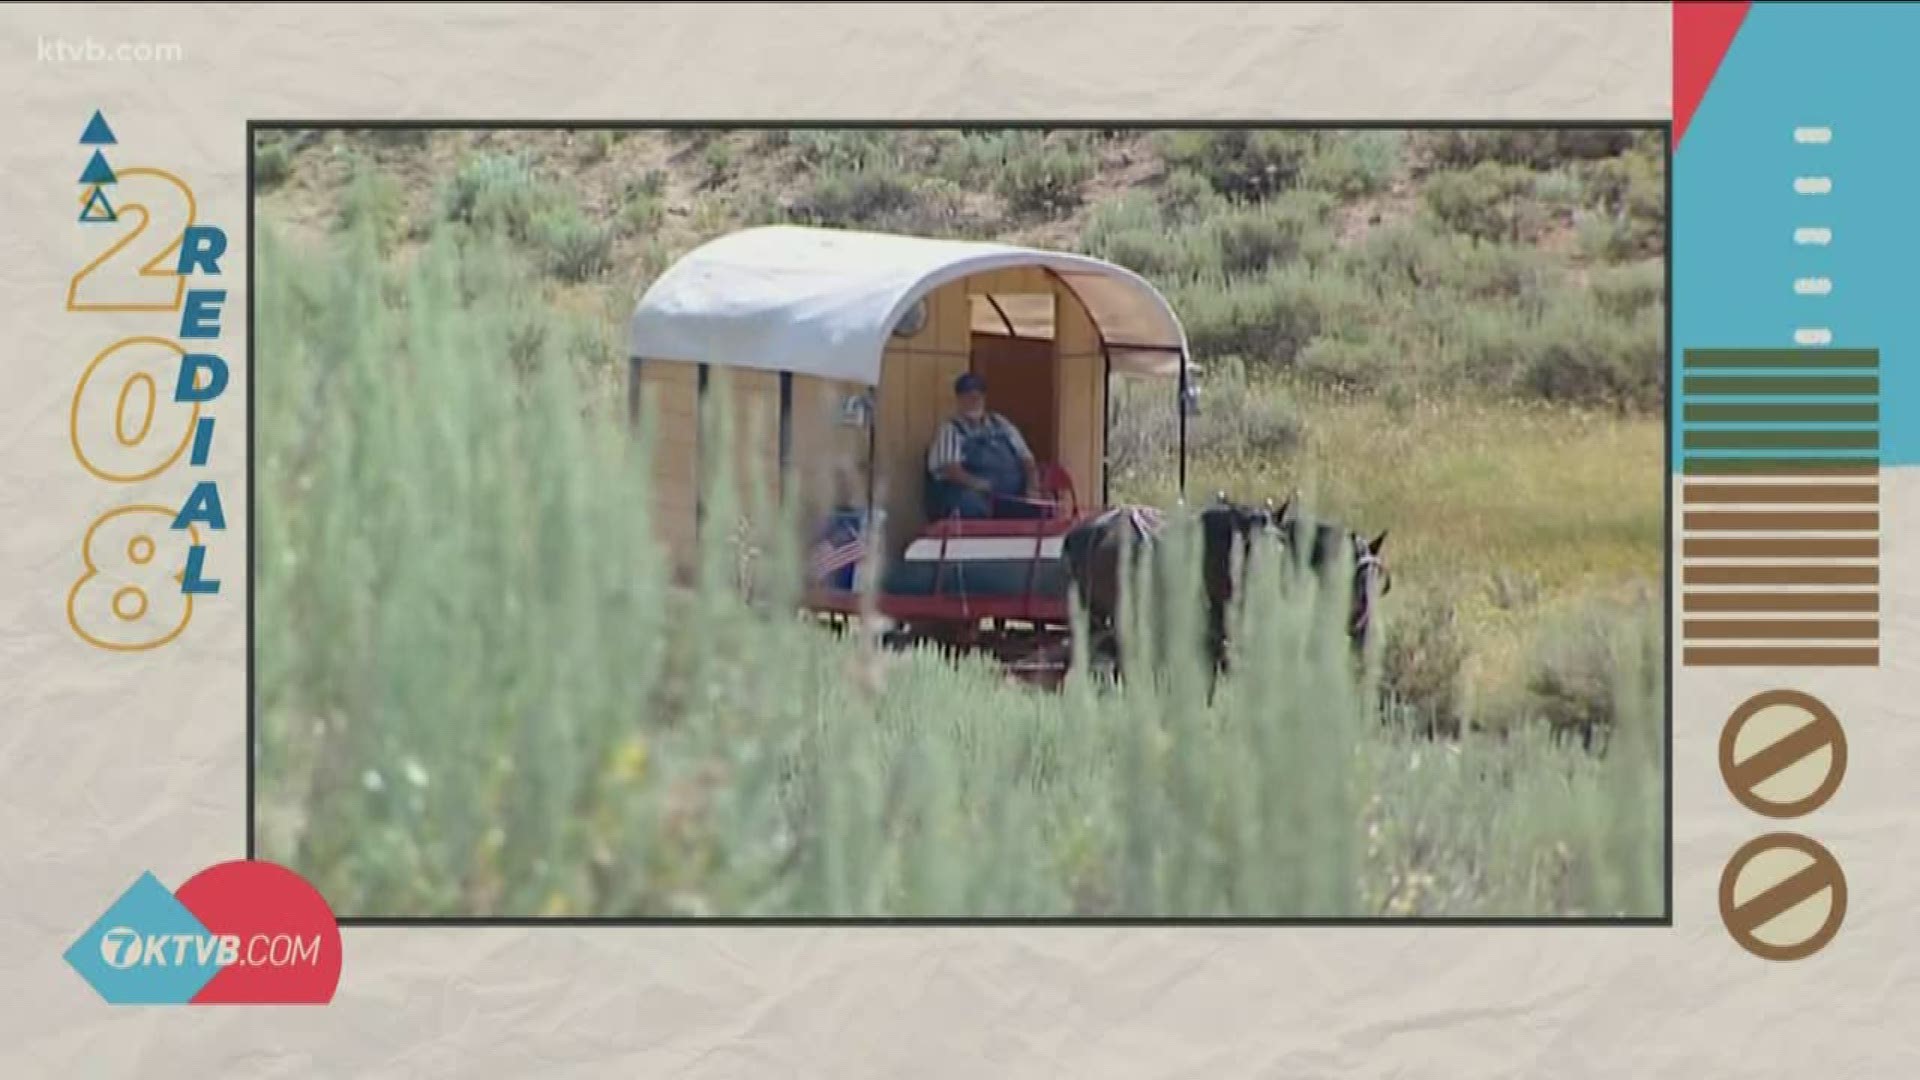 About 12 years ago, one man from Blackfoot decided to retrace the wagon ruts from Montpelier to Nampa.